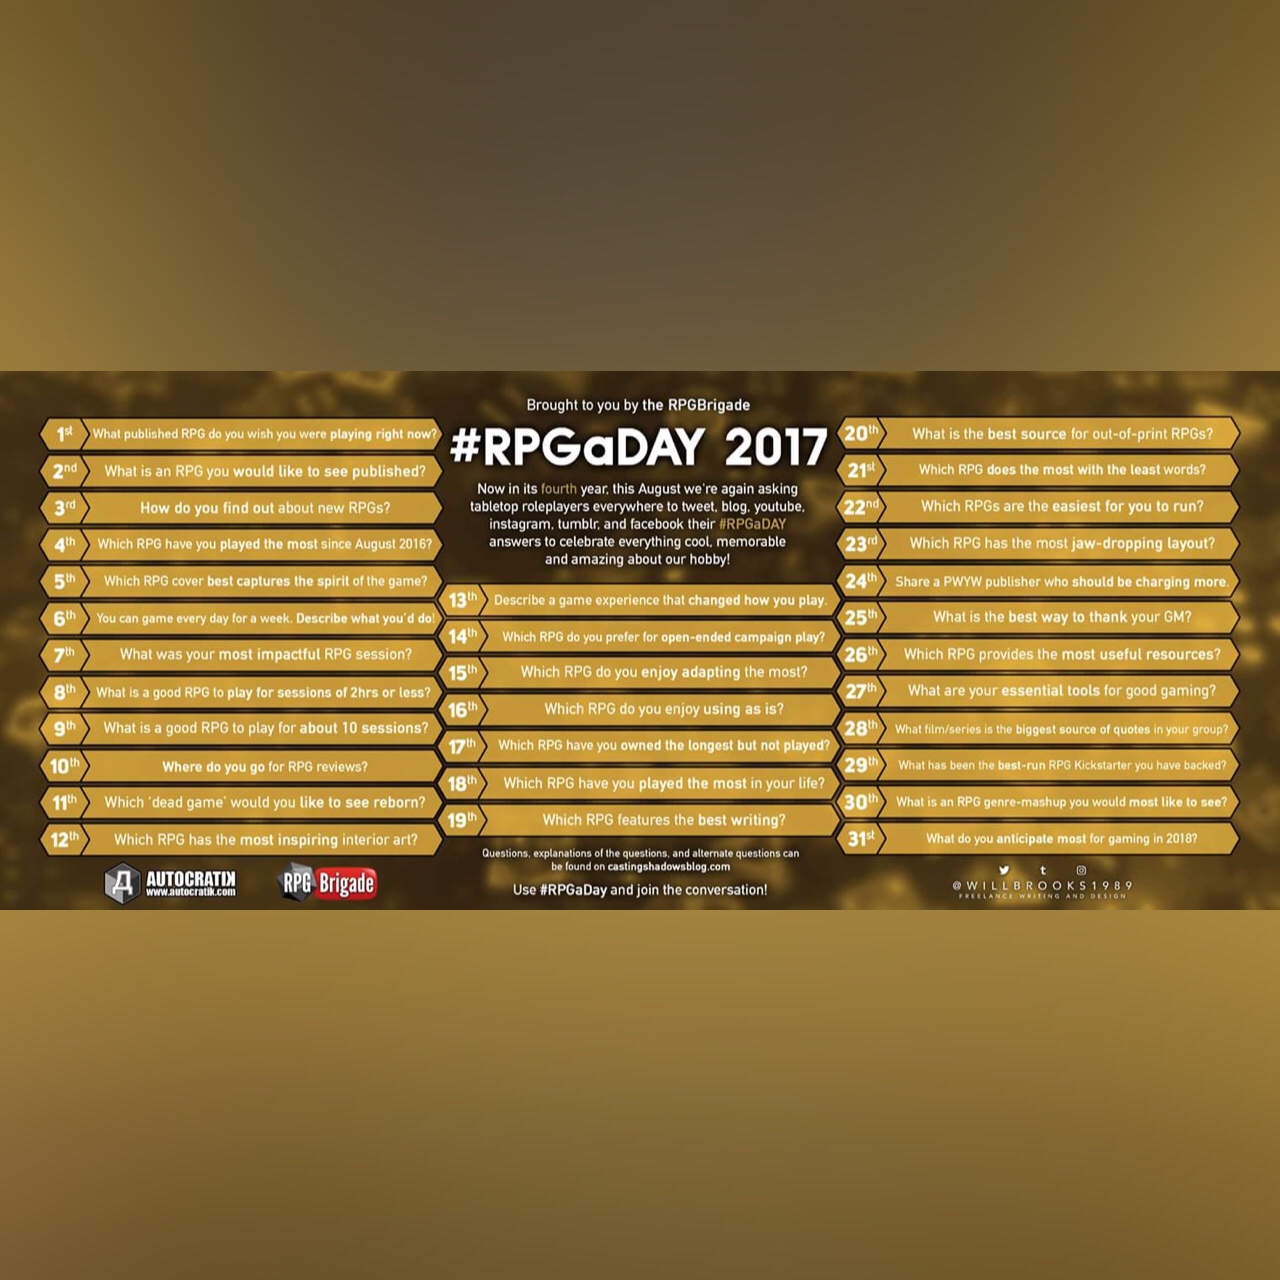 RPGaDAY 2017 August 20th What is the best source for out-of-print RPGs?